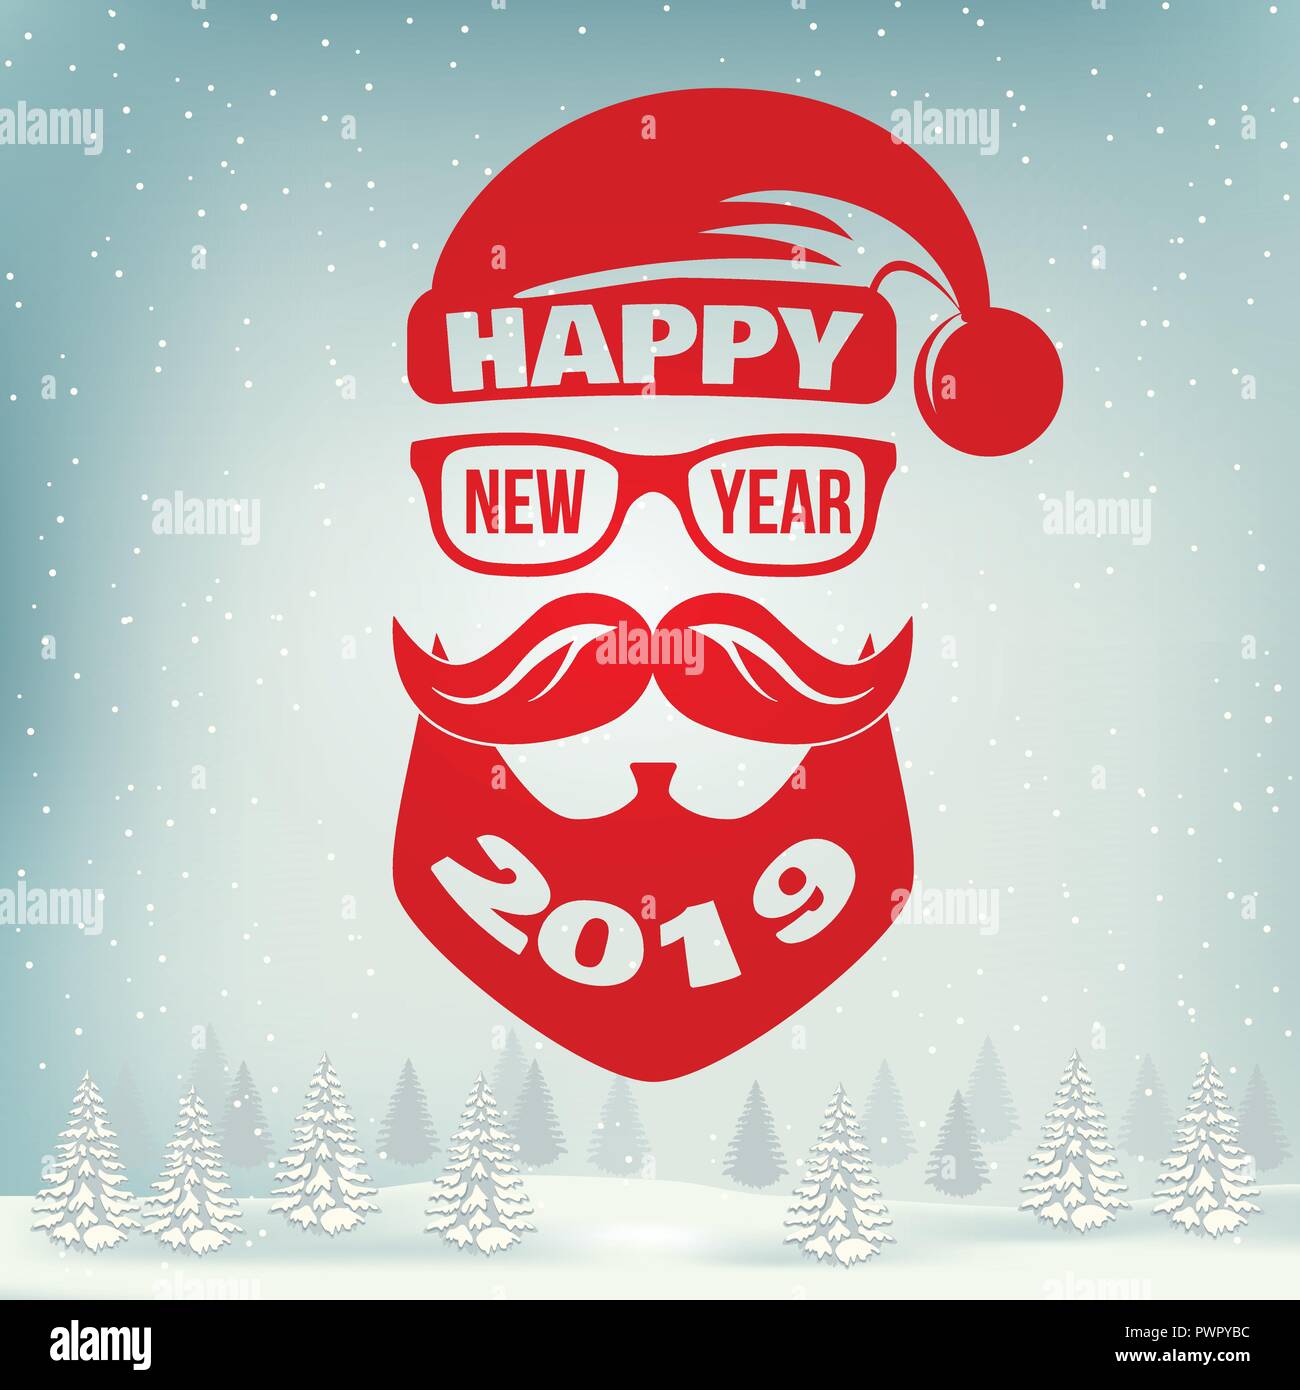 Happy New Year stamp, sticker set with Santa Claus. Vector illustration. Vintage typographic design for xmas, new year emblem in retro style. Happy 2019 New Year overlay. Stock Vector